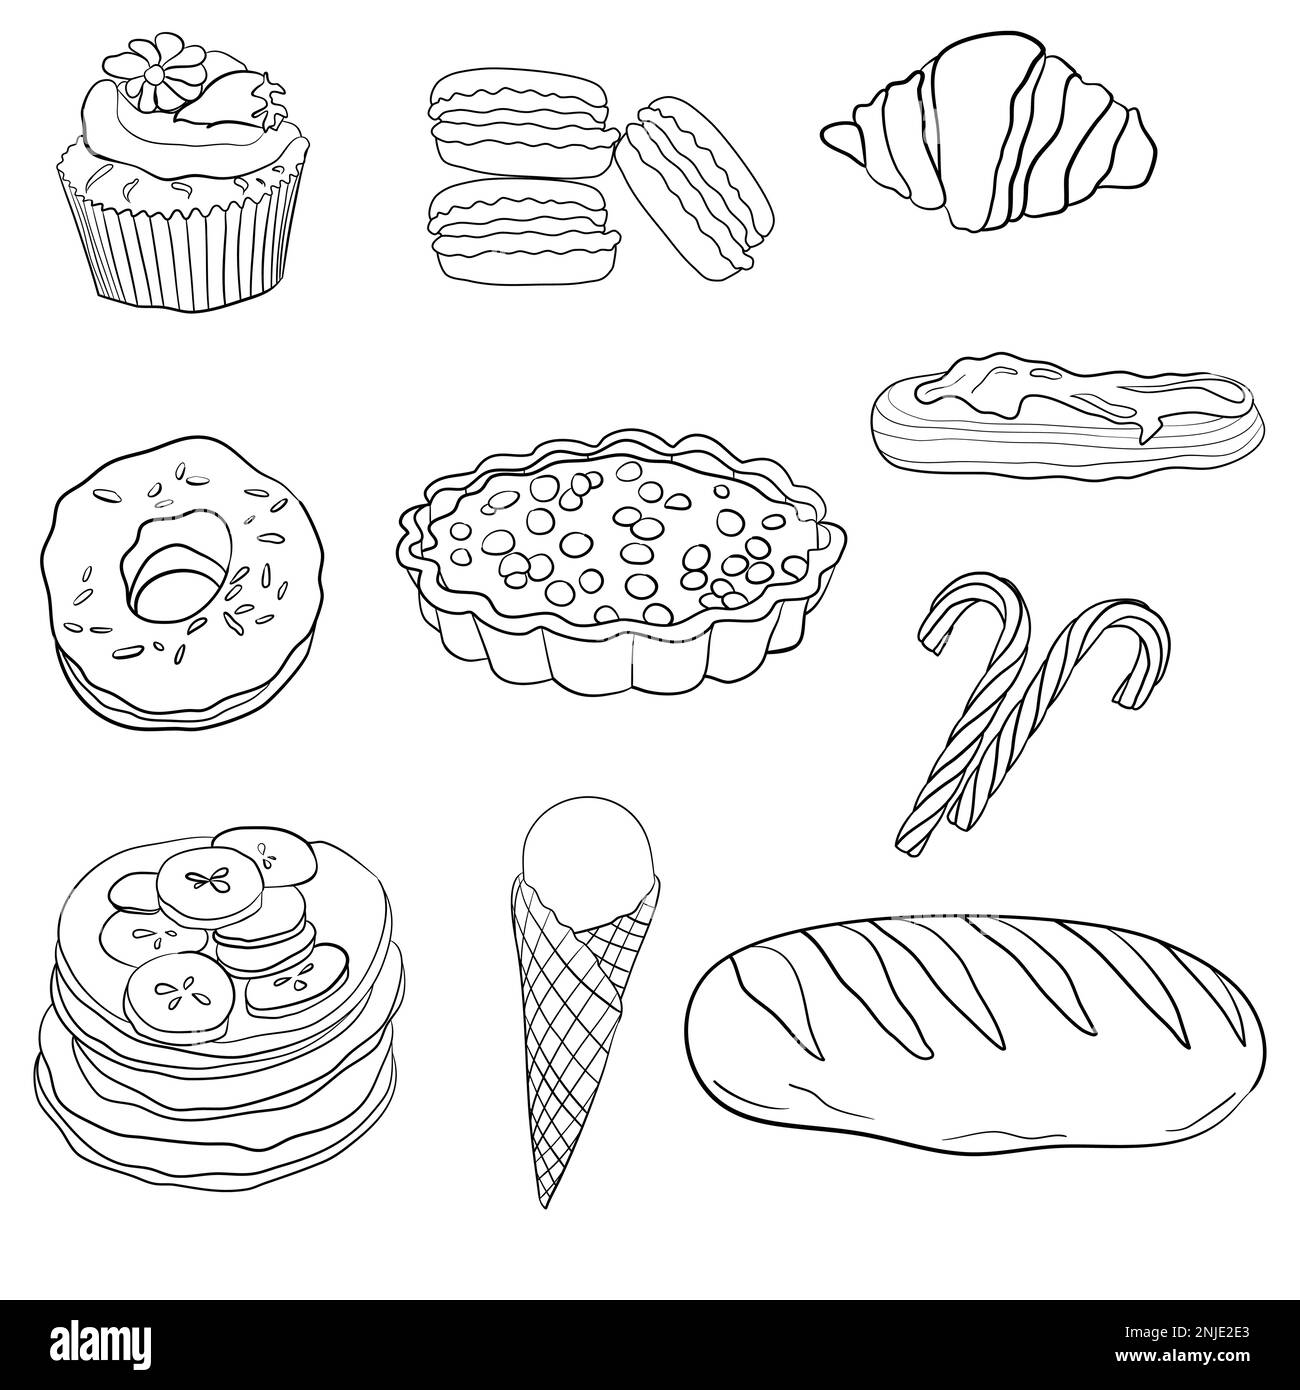 Desserts and pastries in doodle technique vector illustration Stock Vector